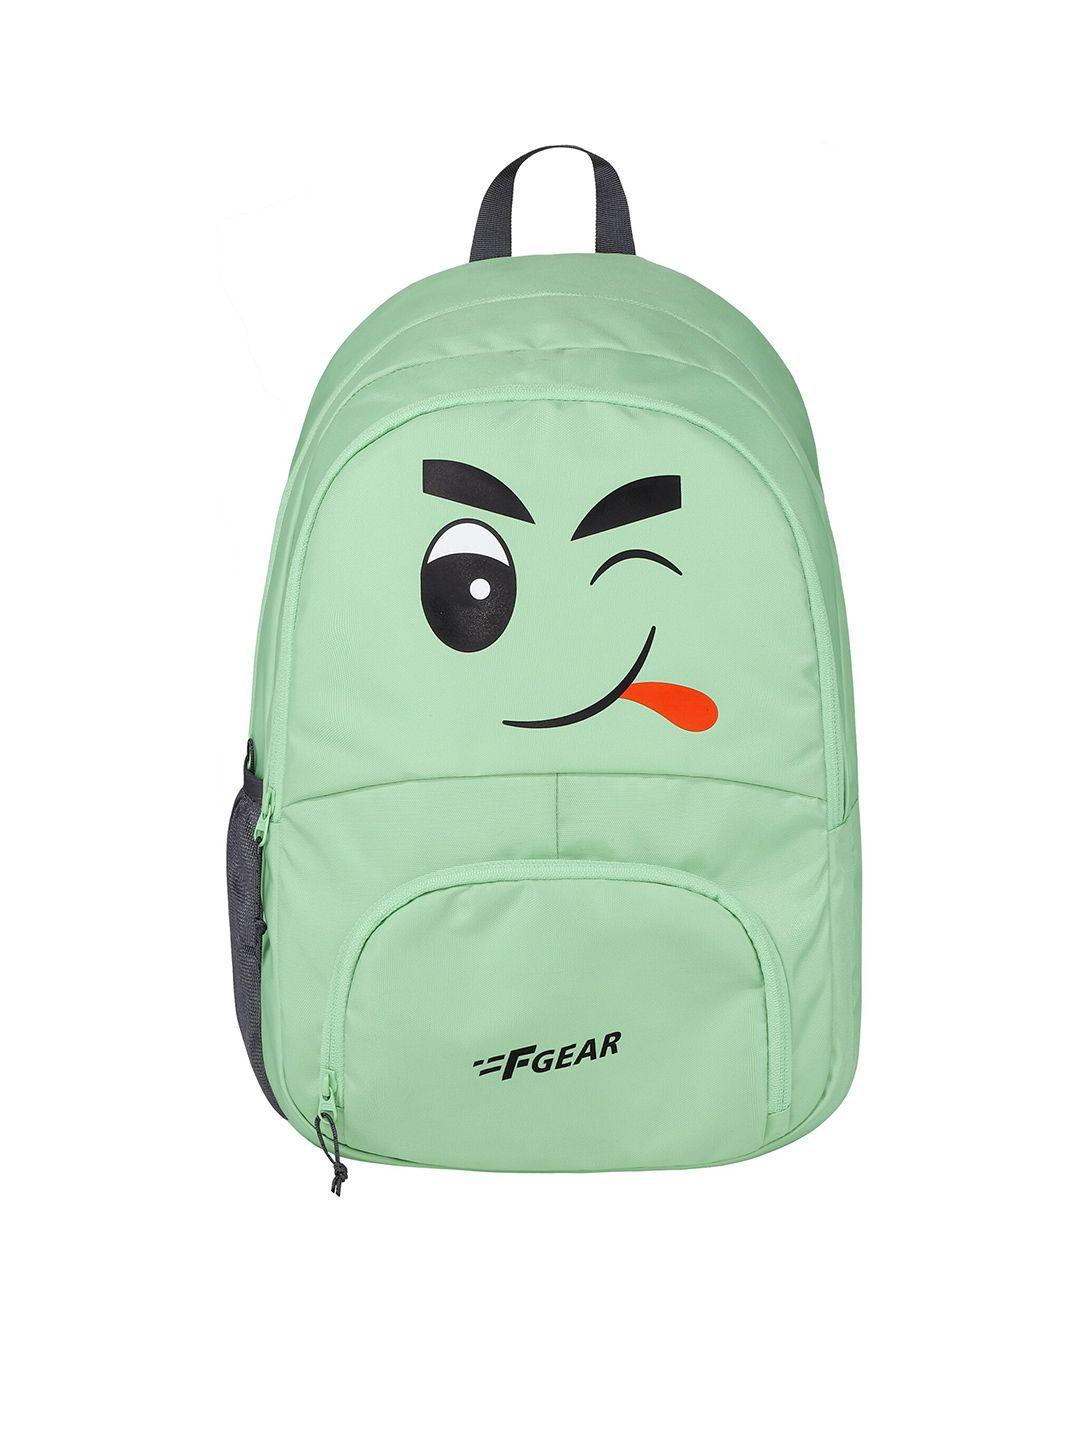 f gear unisex kids graphic water resistant backpack